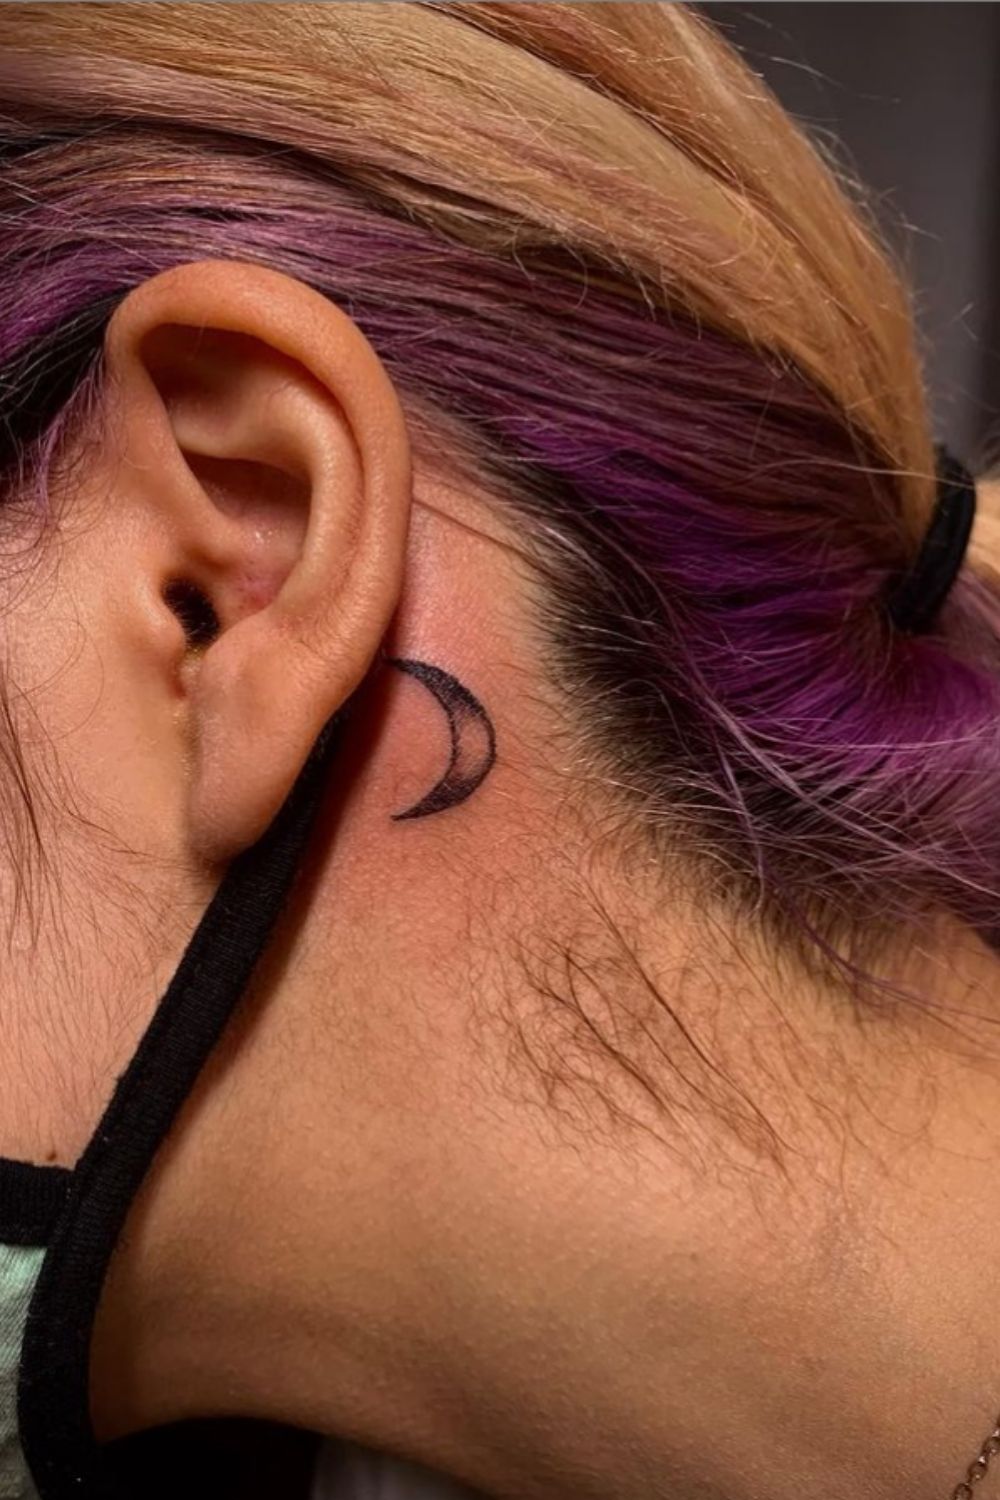 Behind Ear Tattoo: 40 Tiny Tattoo Designs For Girls To Try!